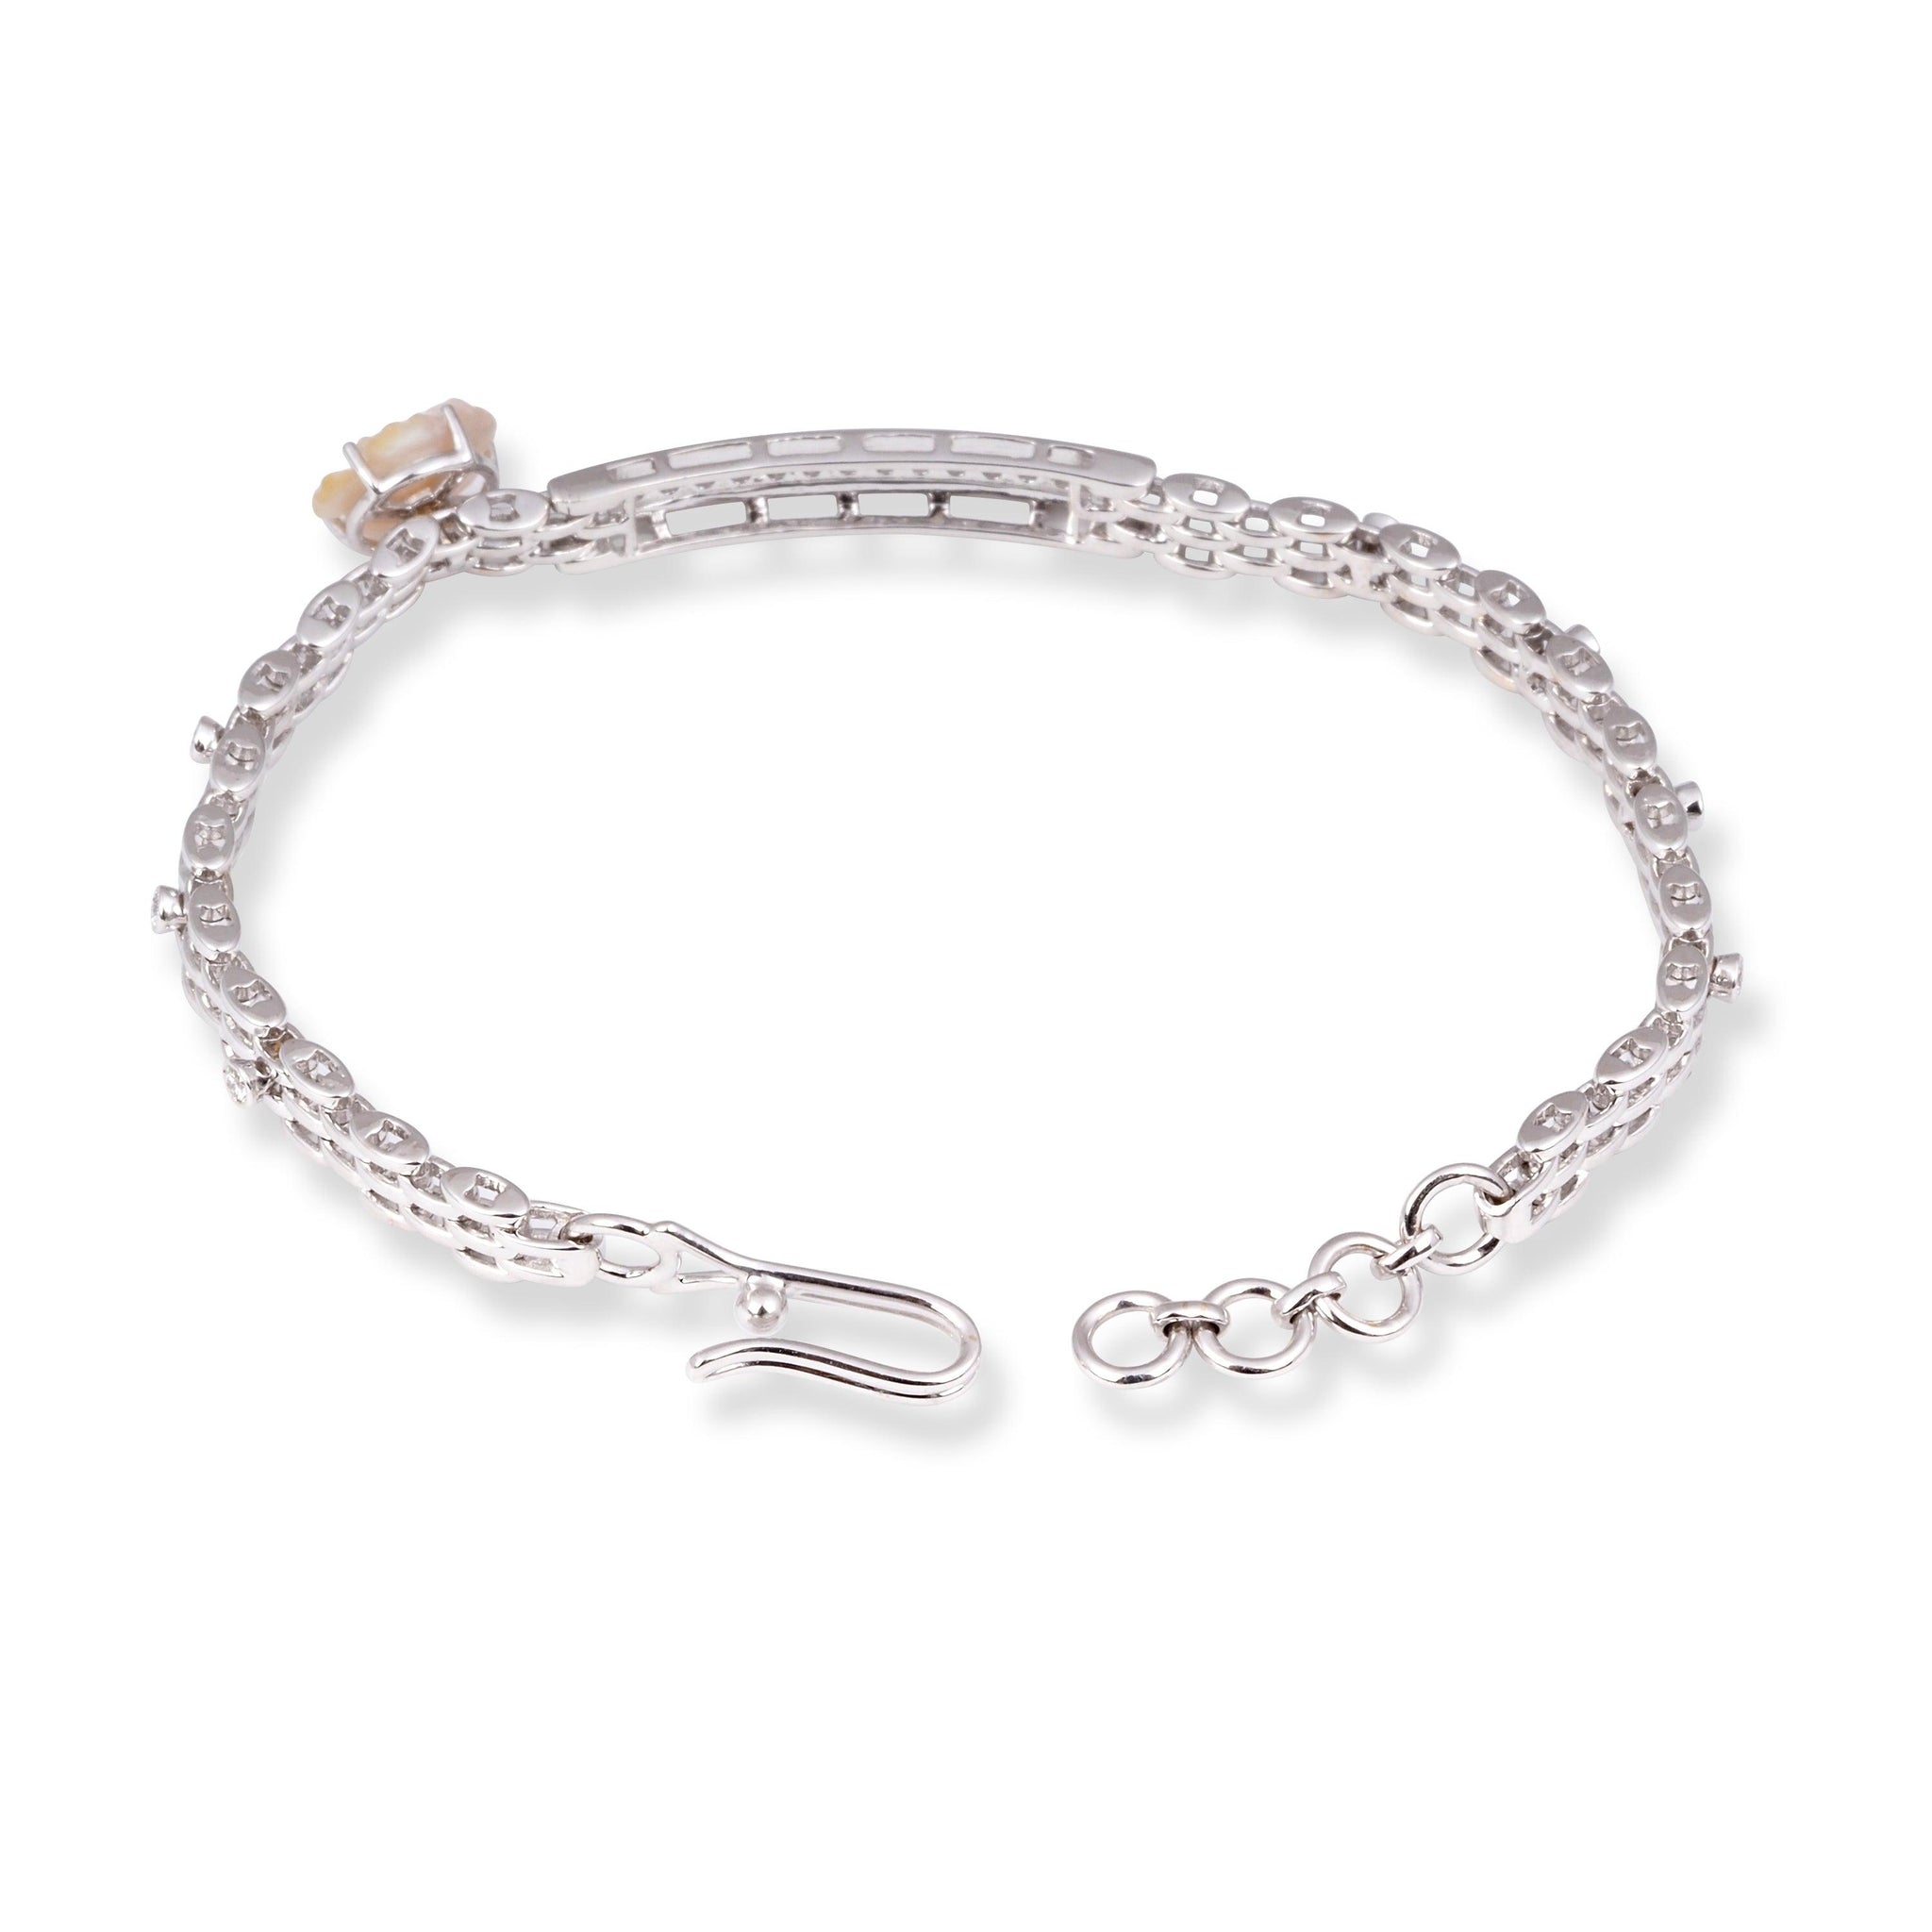 18ct White Gold Pavé Diamond and Cultured Pearl ID Bracelet with Flower Accent MCS6912